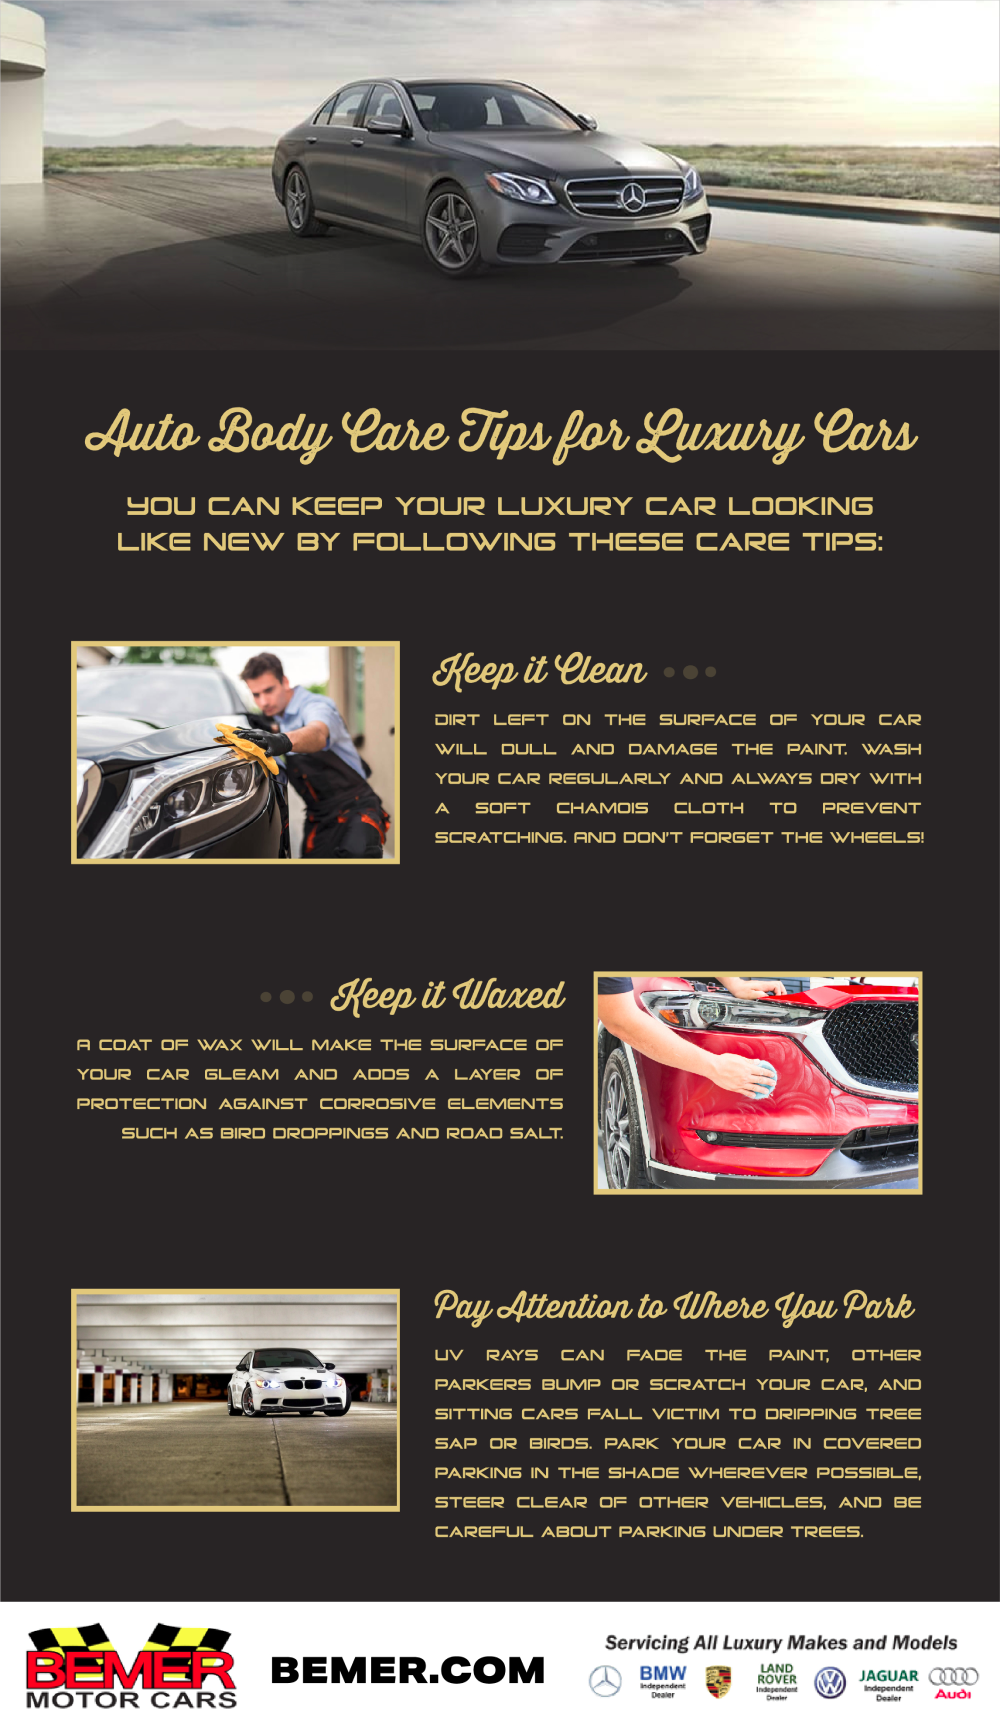 Auto Body Care Tips for Luxury Cars